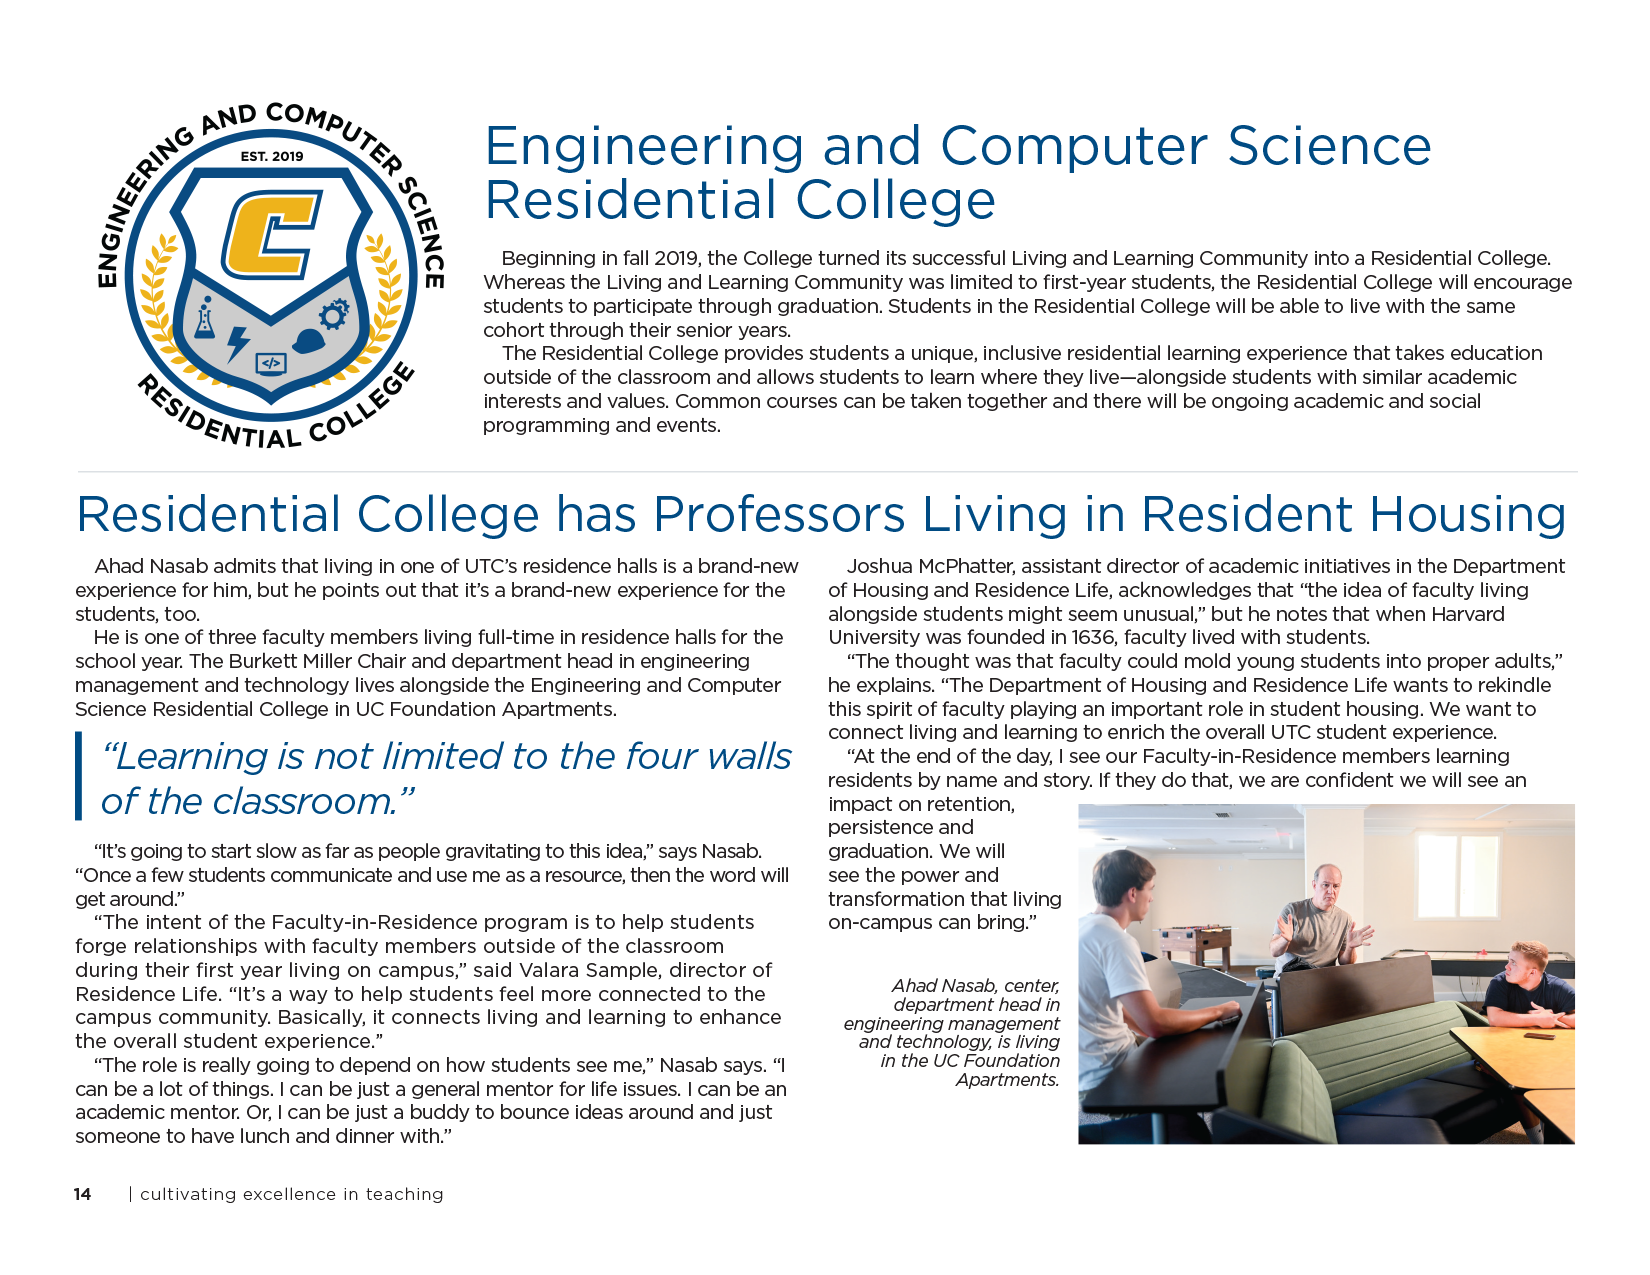 College of Engineering and Computer Science Annual Review; text equivalent available at utc.edu/college-engineering-computer-science/annual-review